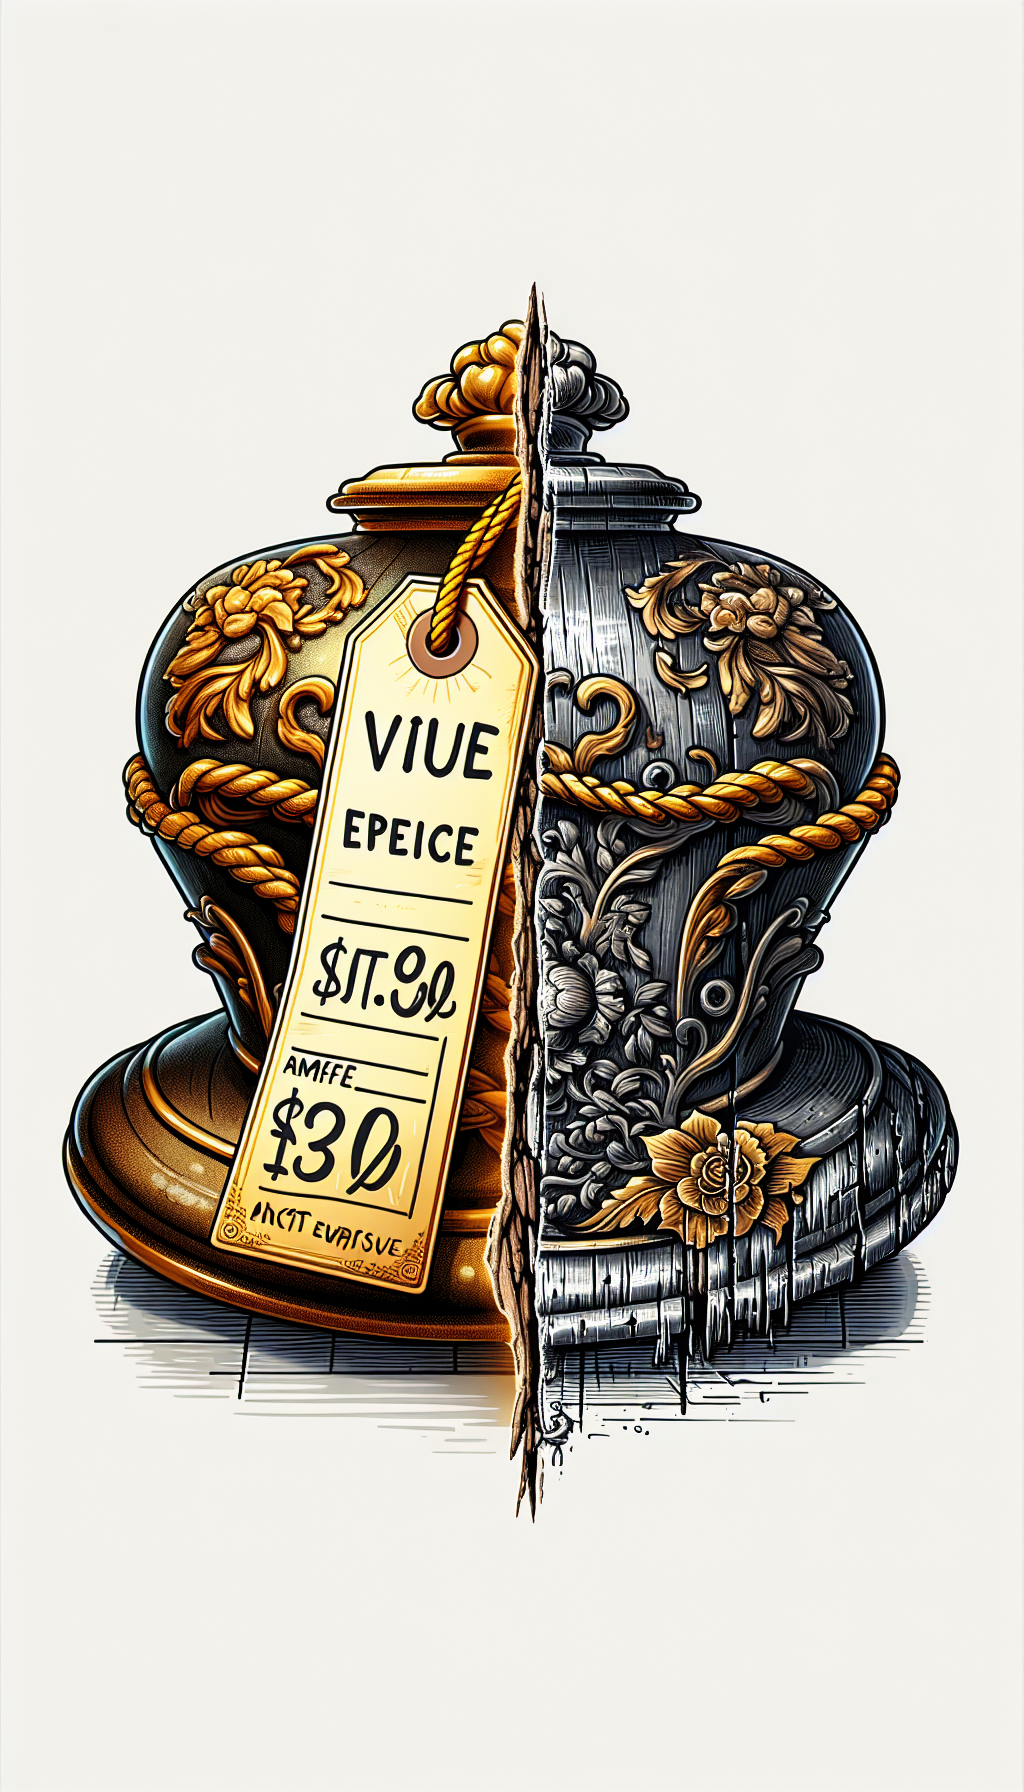 A split illustration embodies an antique with one half meticulously restored, gleaming and valuable, juxtaposed against the other half neglected and dilapidated, losing value. Elegant vintage-style value tags dangle from each side, the restored side's tag marked with a high value in ornate script, while the ruined side's tag is faded with a measly sum, symbolizing value's reliance on condition.